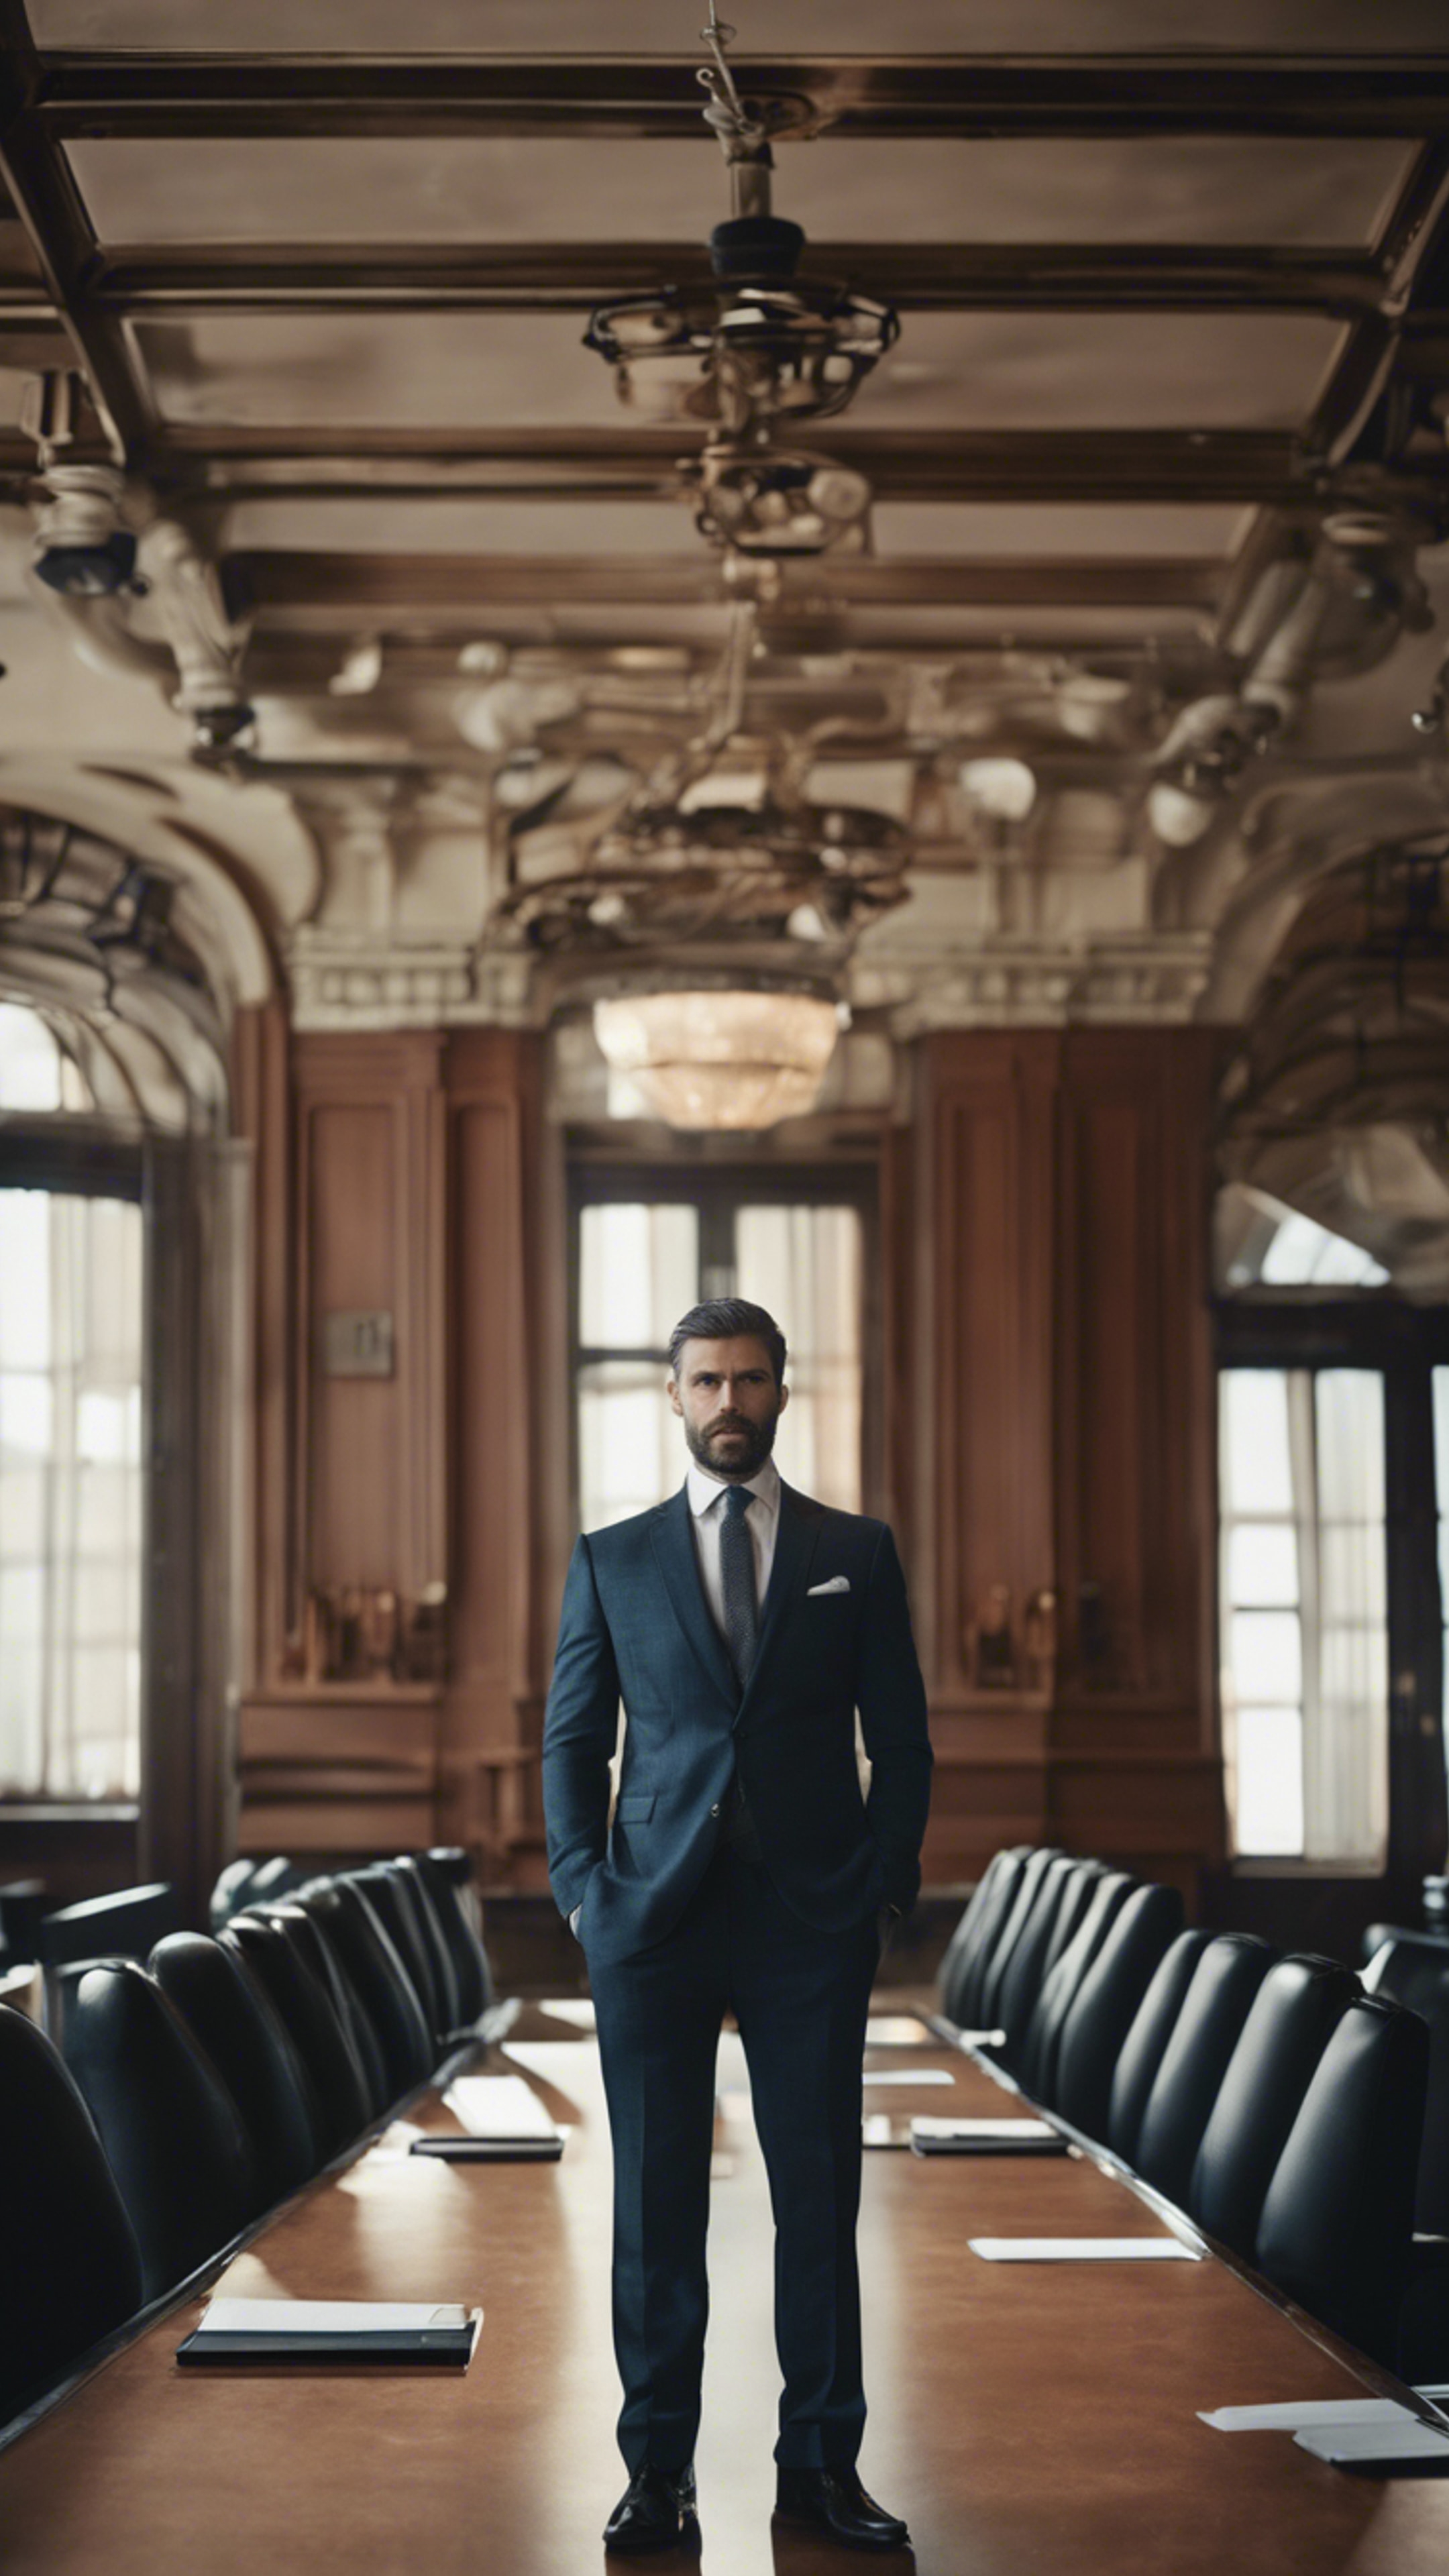 An attractive man in a three-piece suit, standing authoritatively in an impressive boardroom. Wallpaper[27a0637e432a47b48c54]